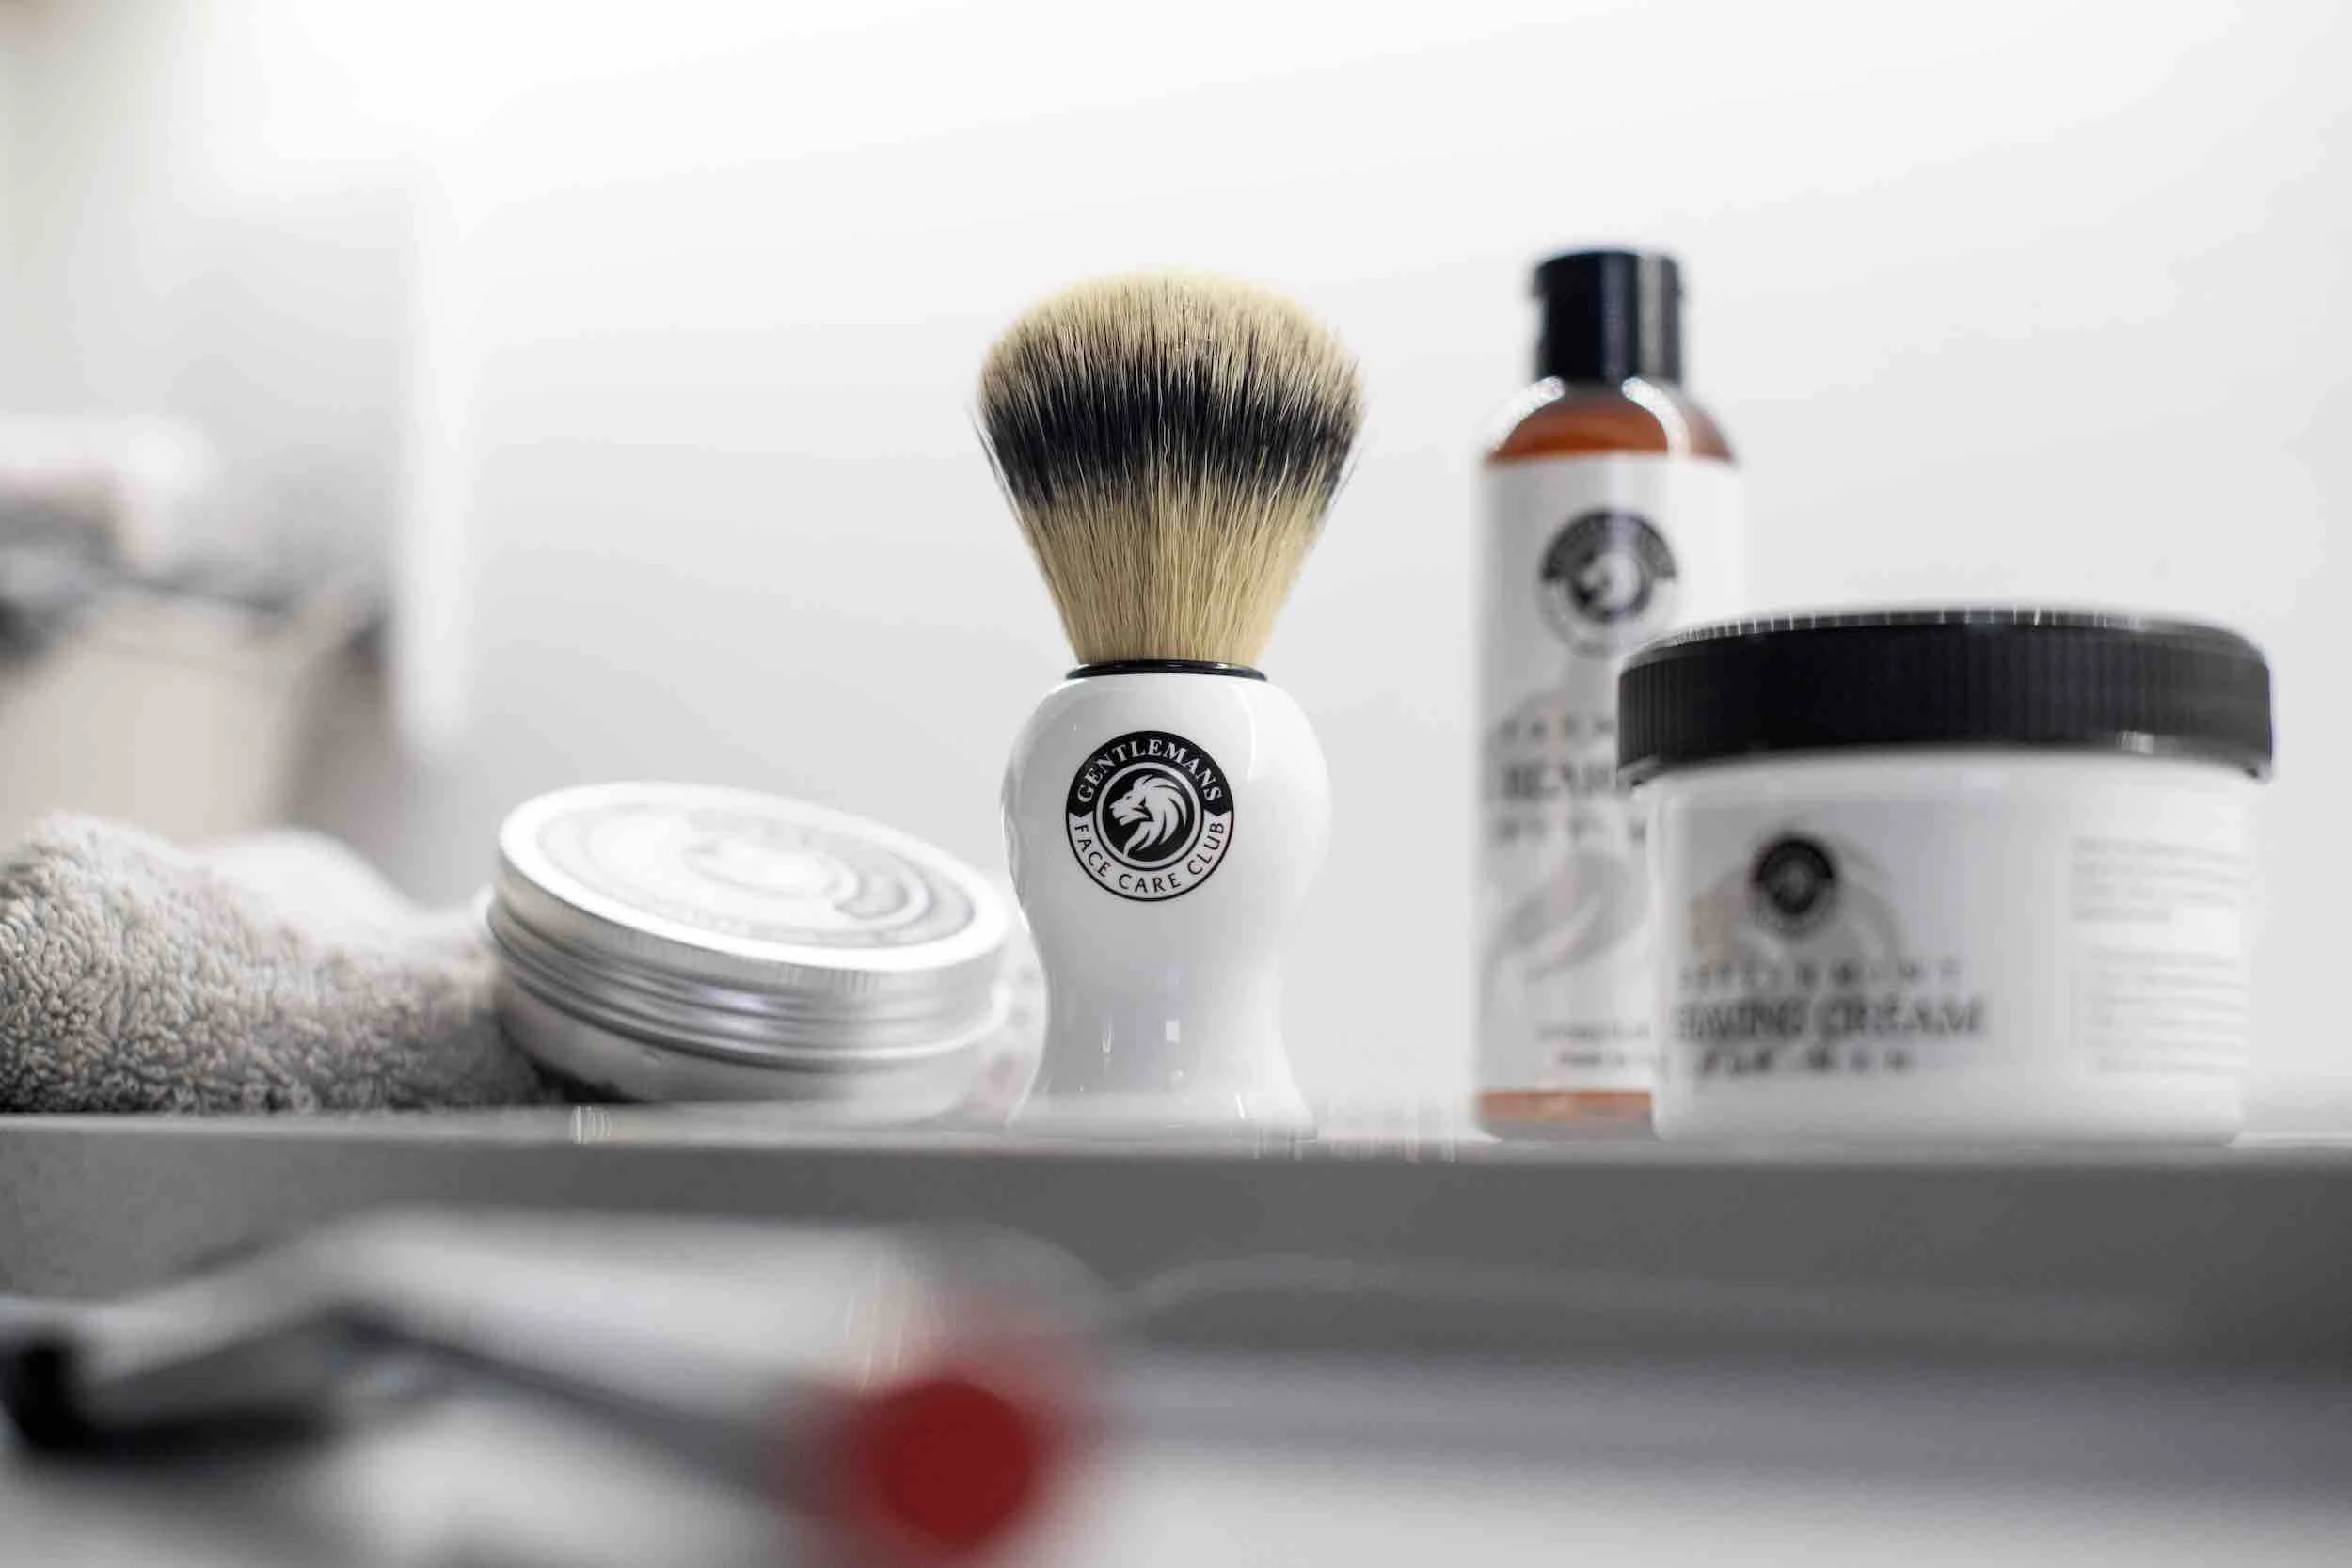 traditional shaving products - brush, cream and balm